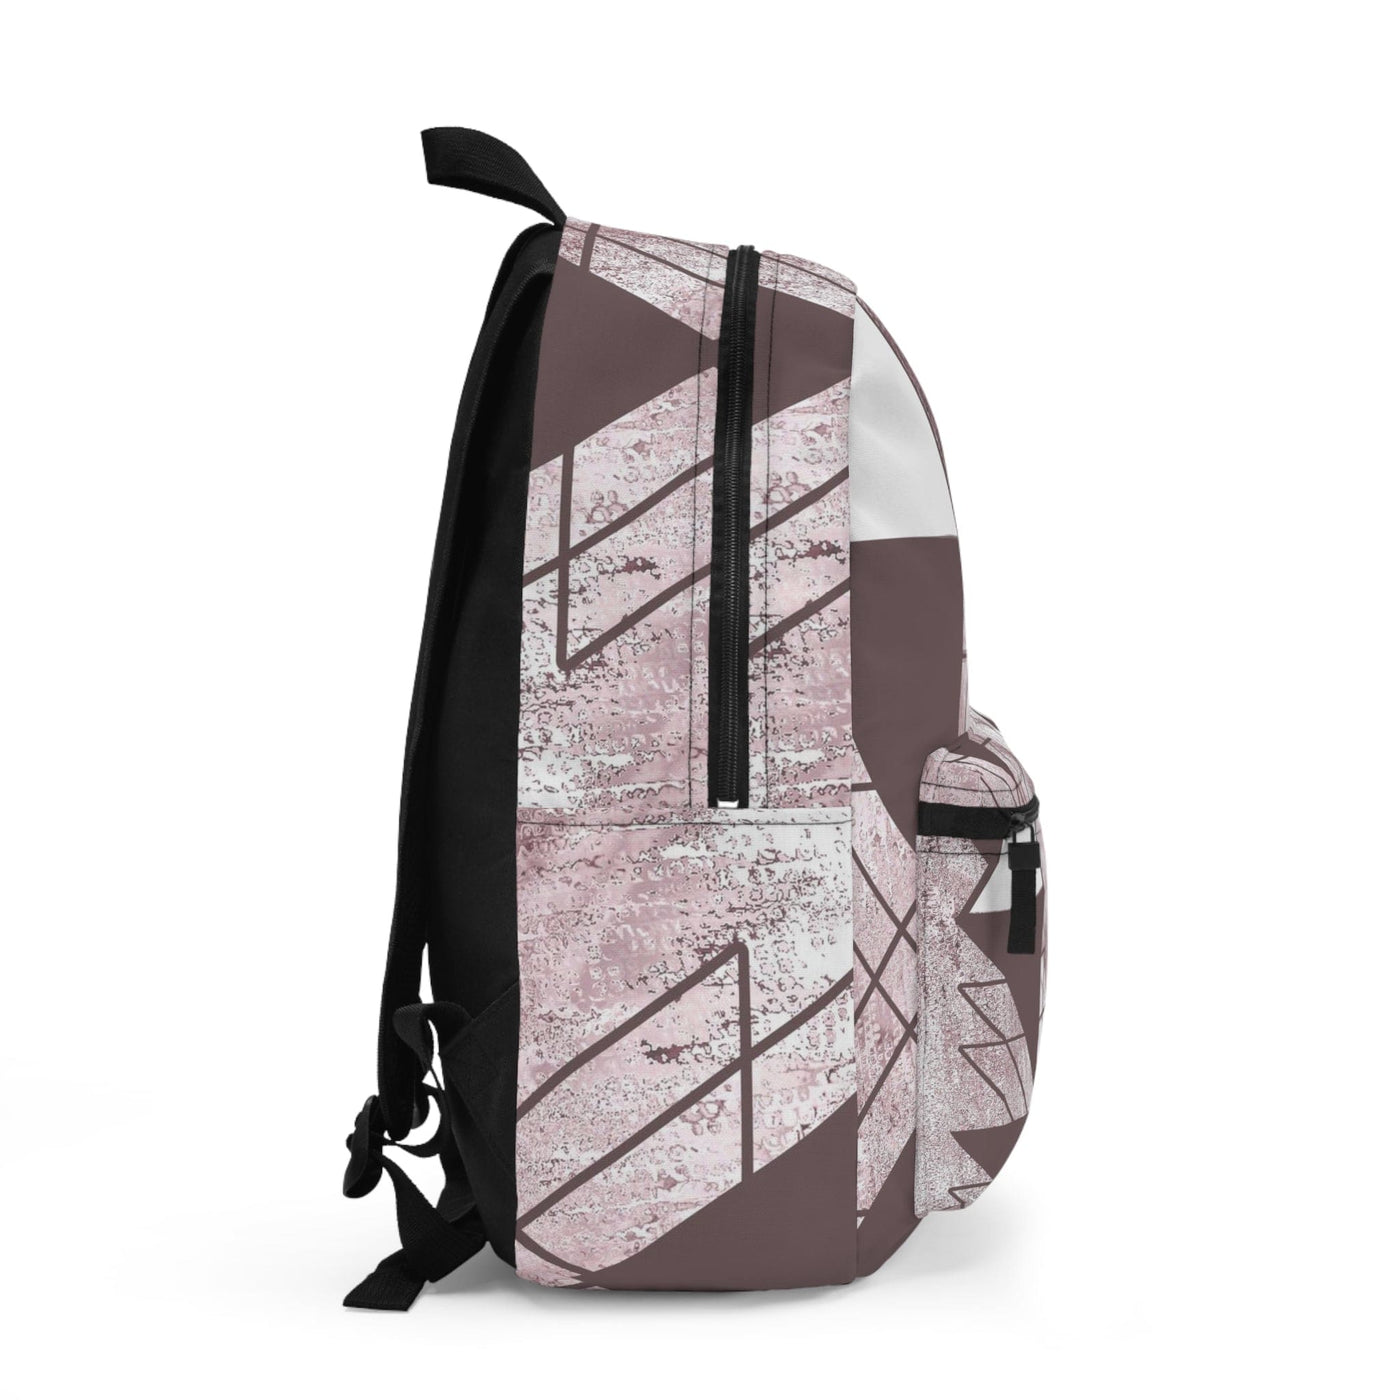 Backpack - Large Water-resistant Bag Mauve Rose And White Triangular Colorblock